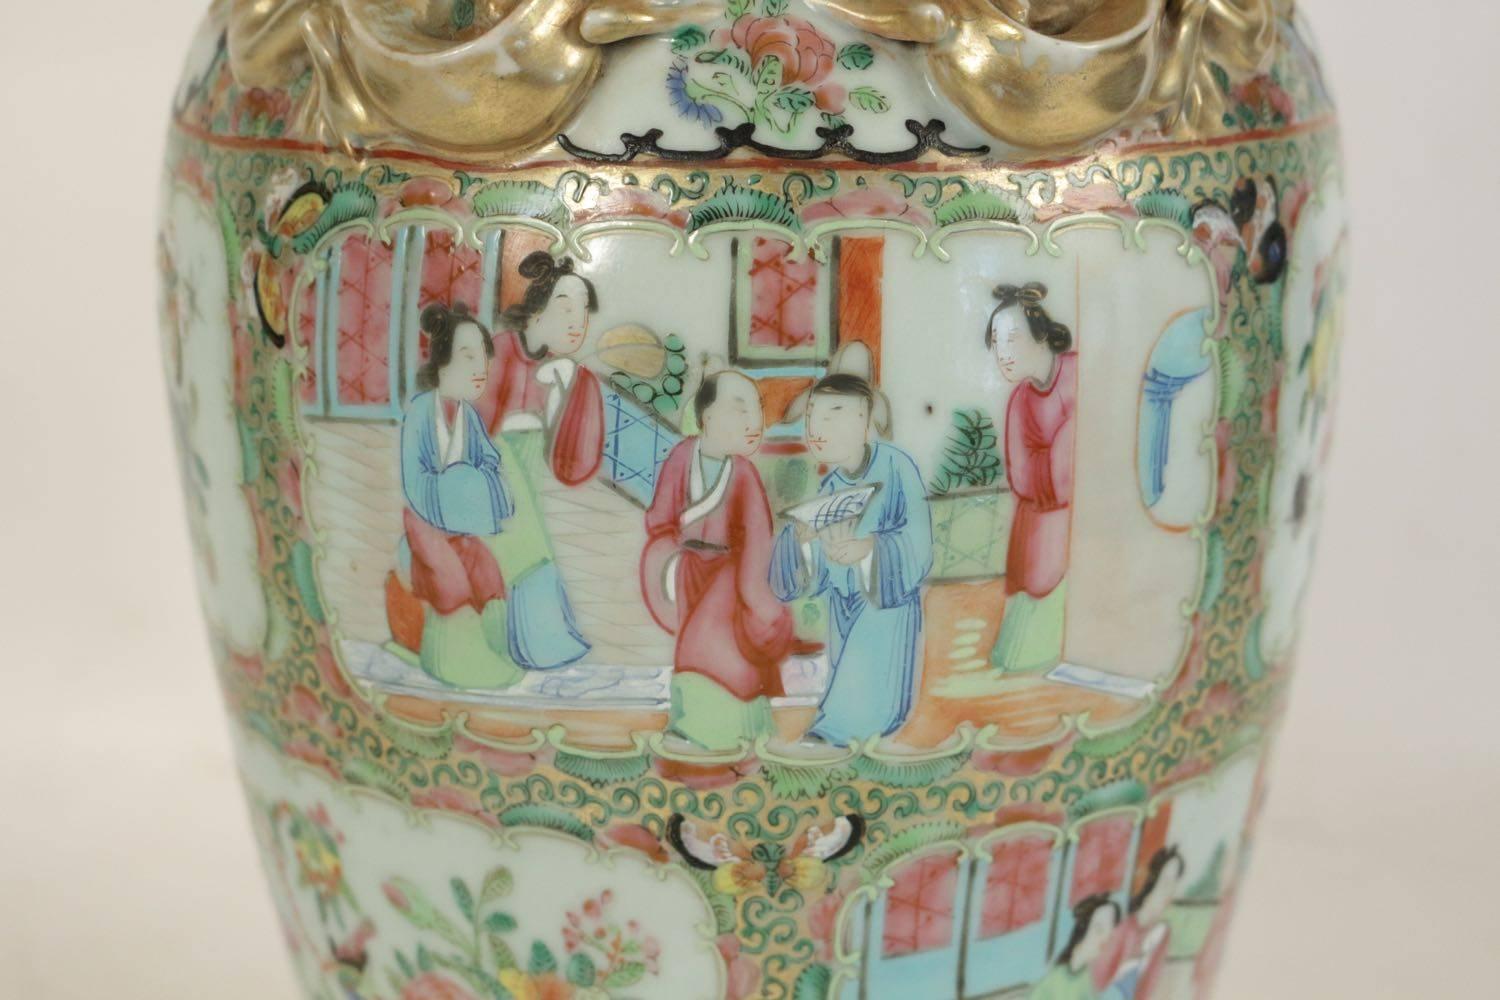 Late 19th Century Chinese Porcelain Lampe from the 19th Century